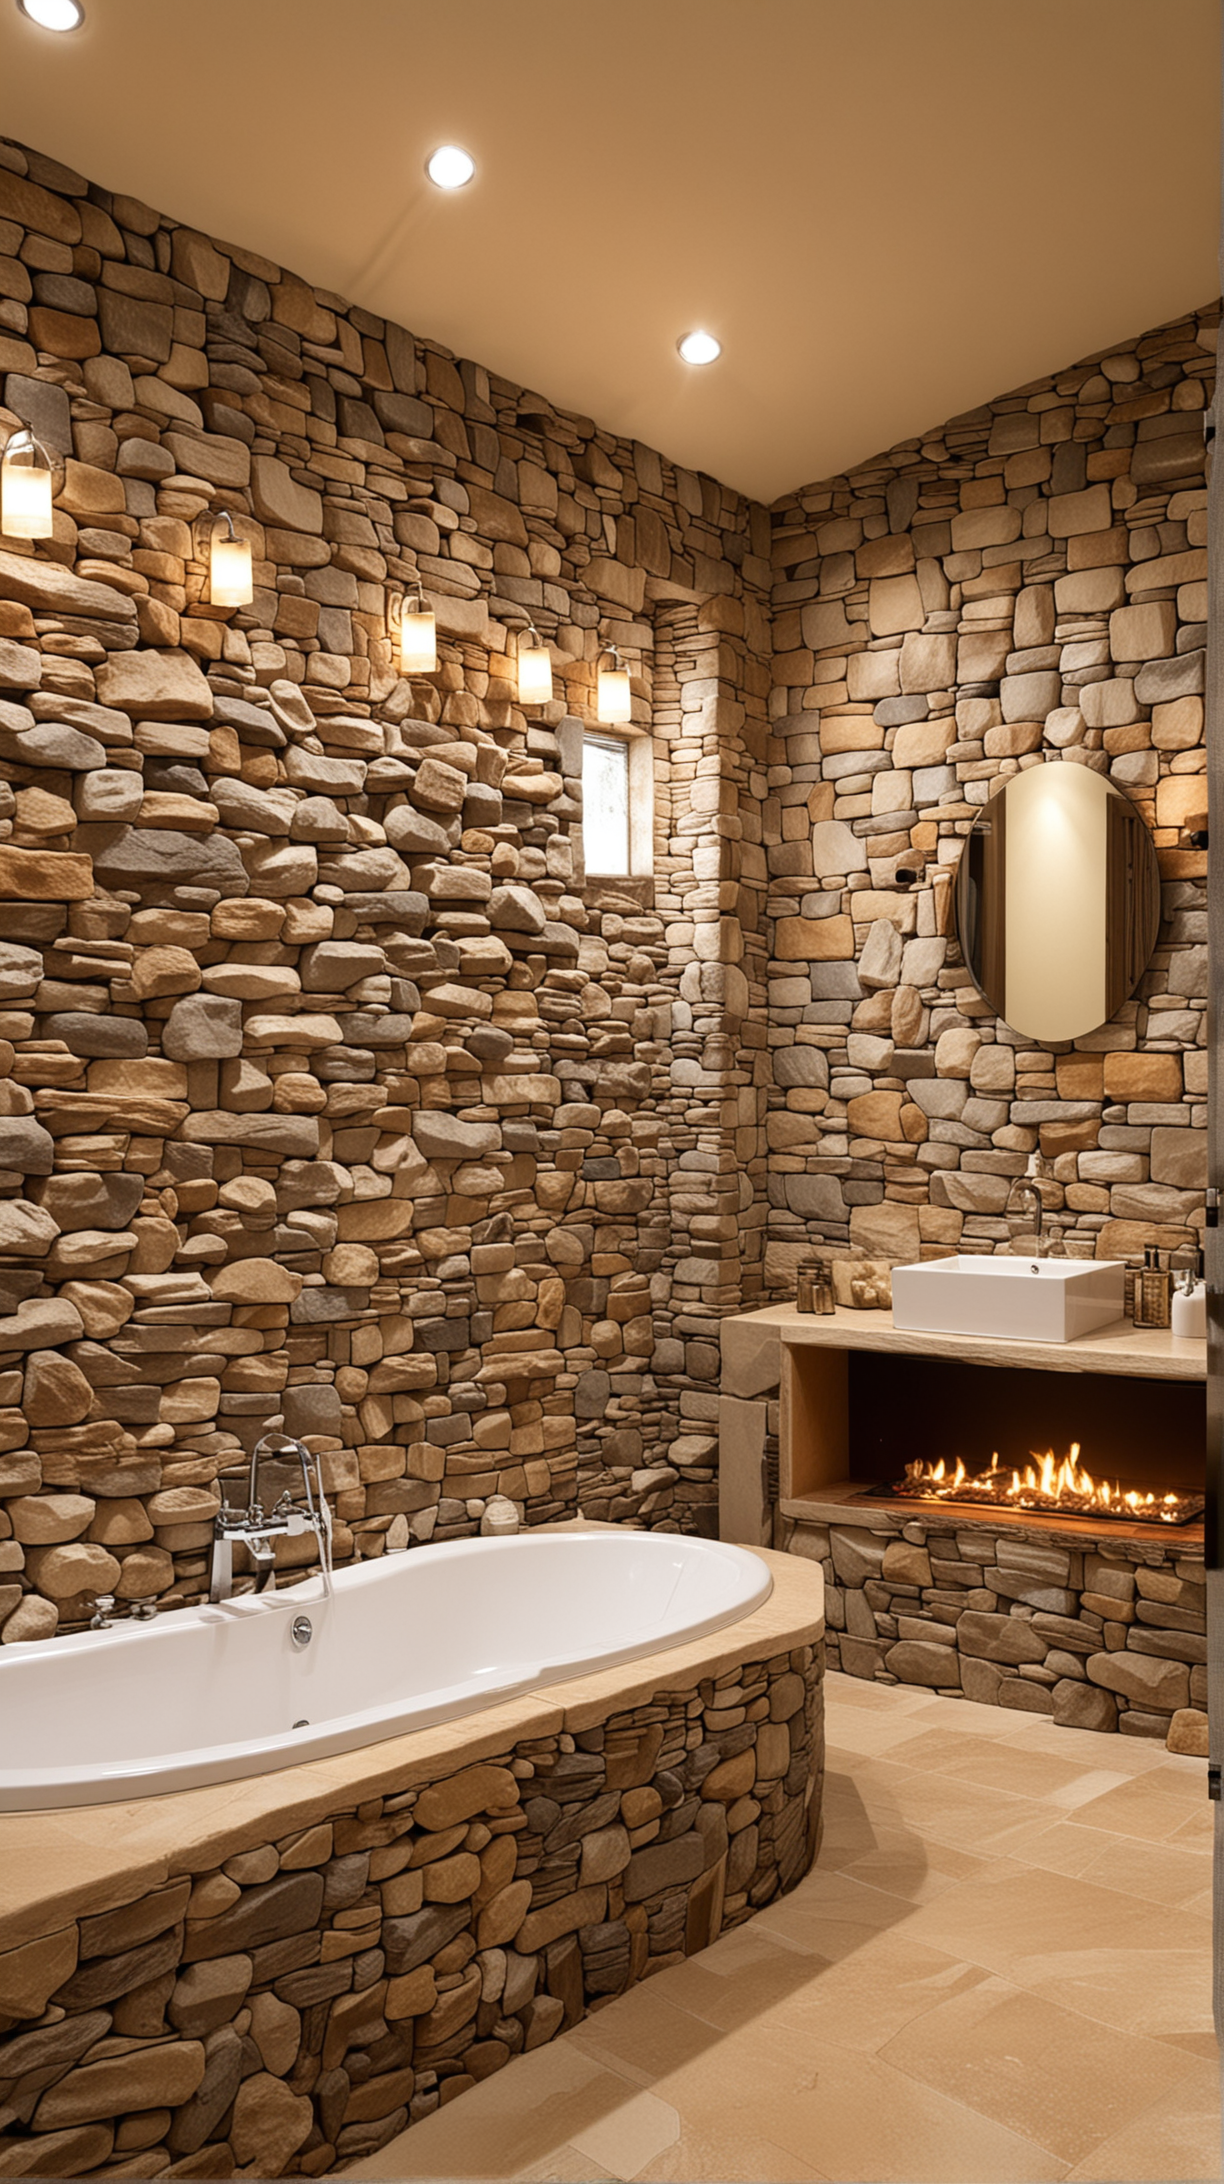 Cozy Bathroom with Stone Fireplace Illuminated by Soft Lighting